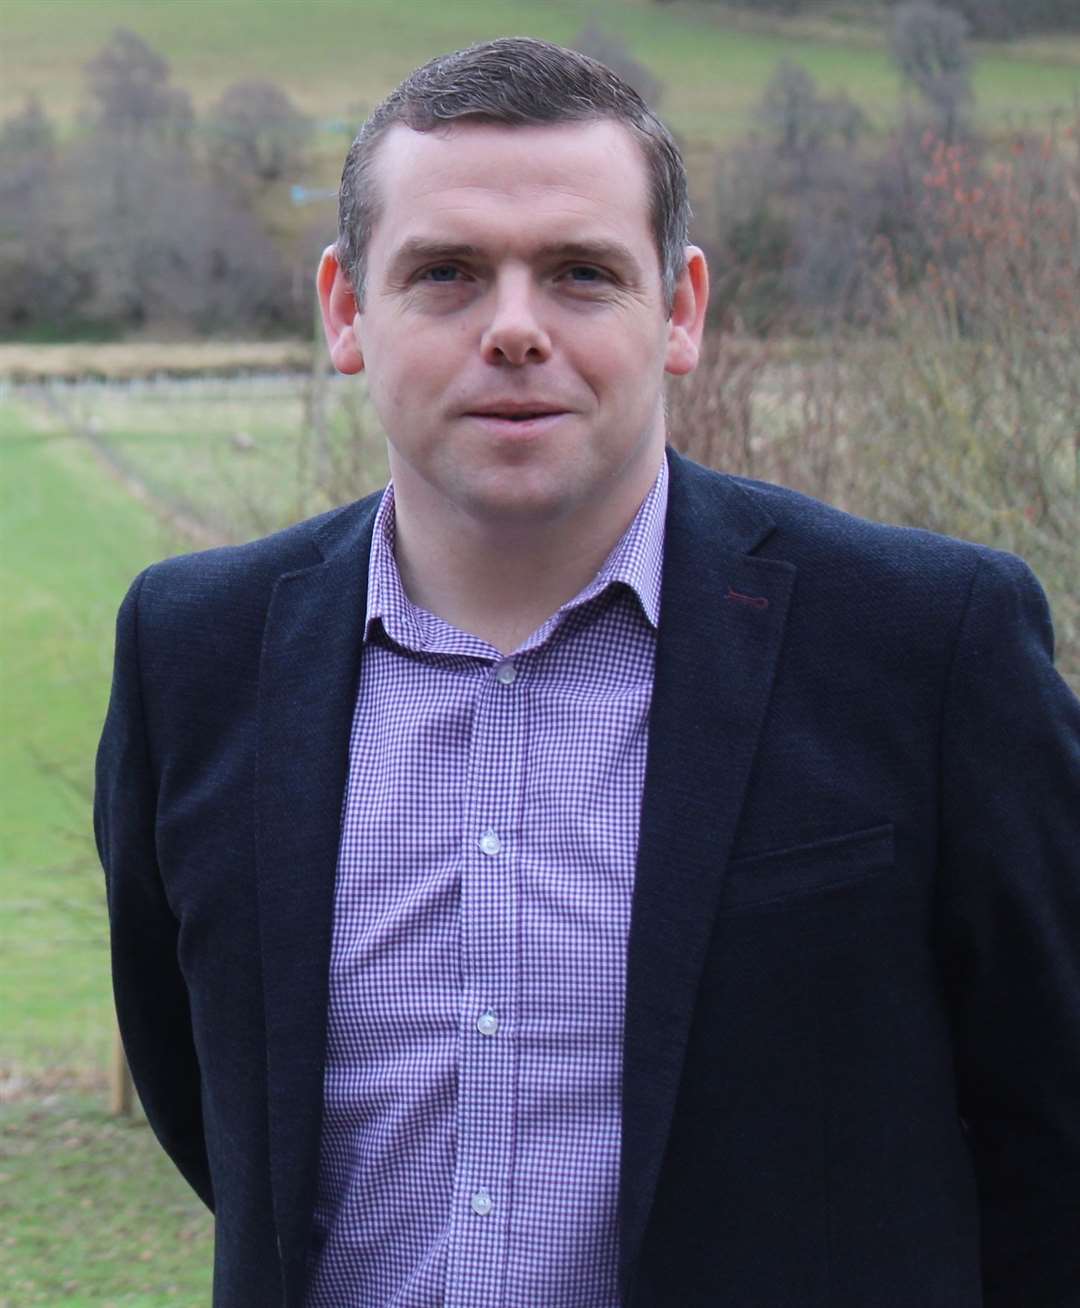 Moray MP Douglas Ross stood up for farmers on the subject of tax on plastic wrap.